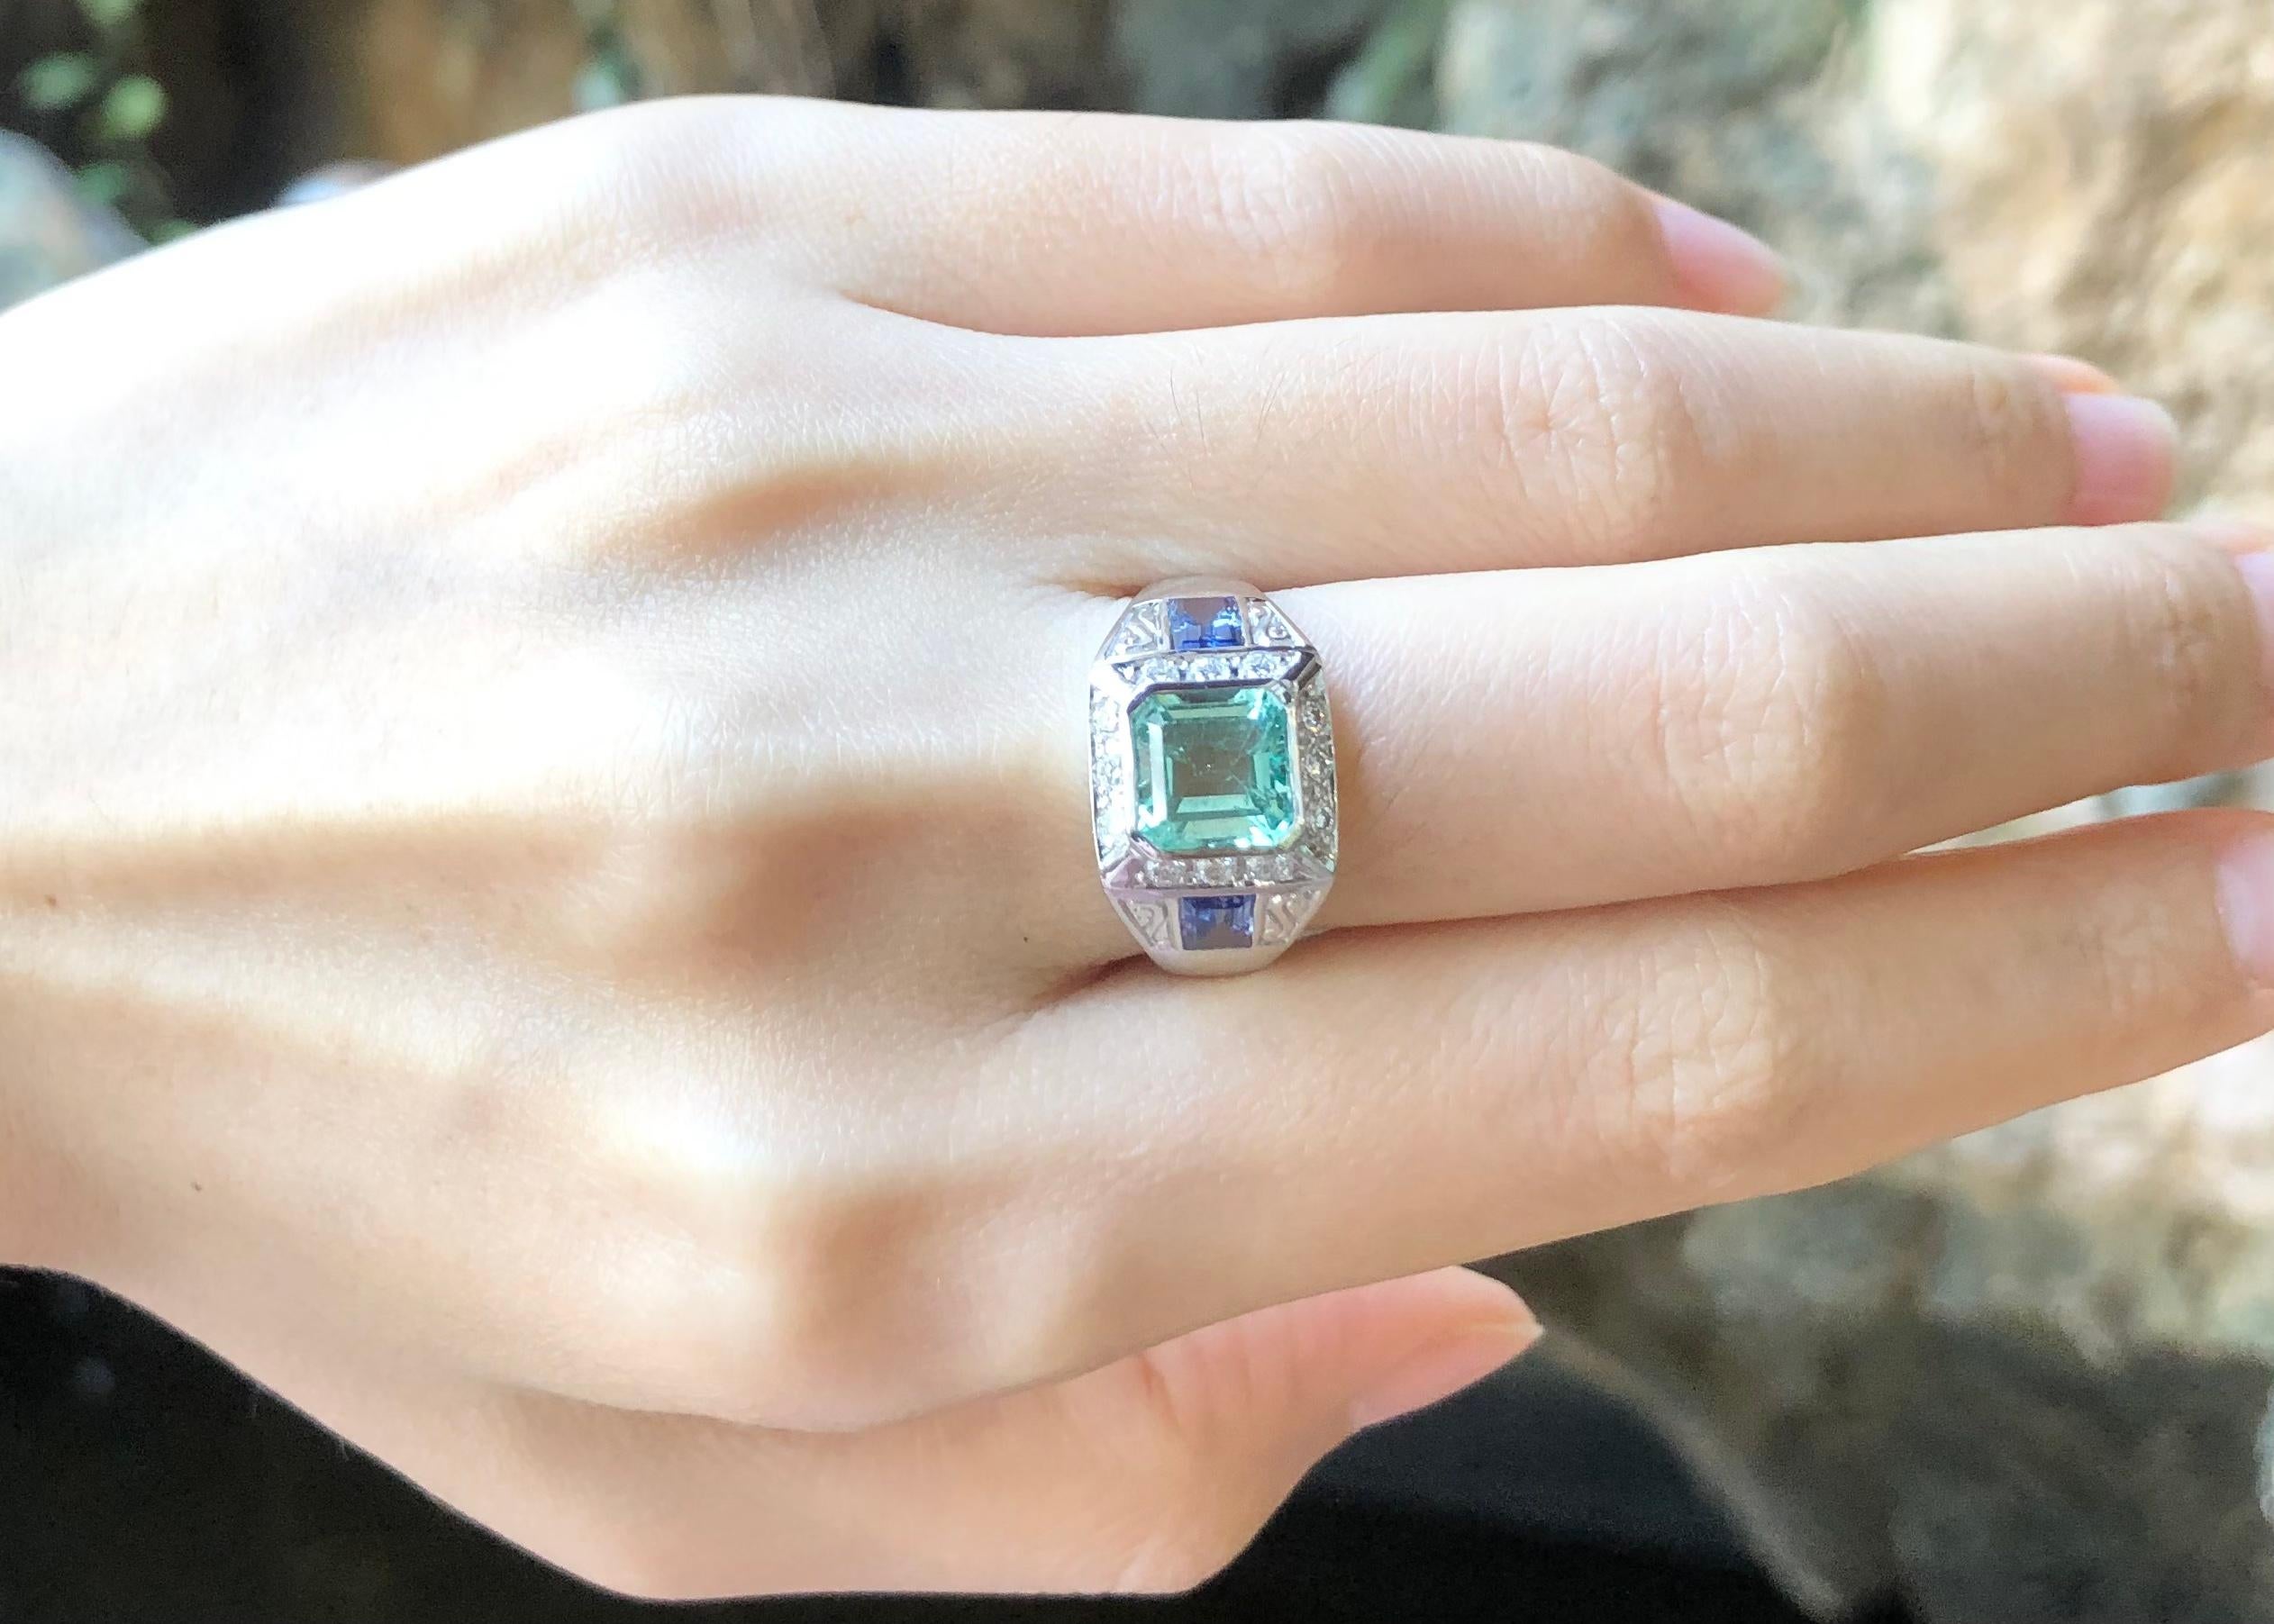 Emerald 1.79 carats , Blue Sapphire 0.92 carat and Diamond 0.35 carat Ring set in 18 Karat White Gold Settings

Width:  0.8 cm 
Length: 0.8 cm
Ring Size: 55
Total Weight: 5.7 grams


